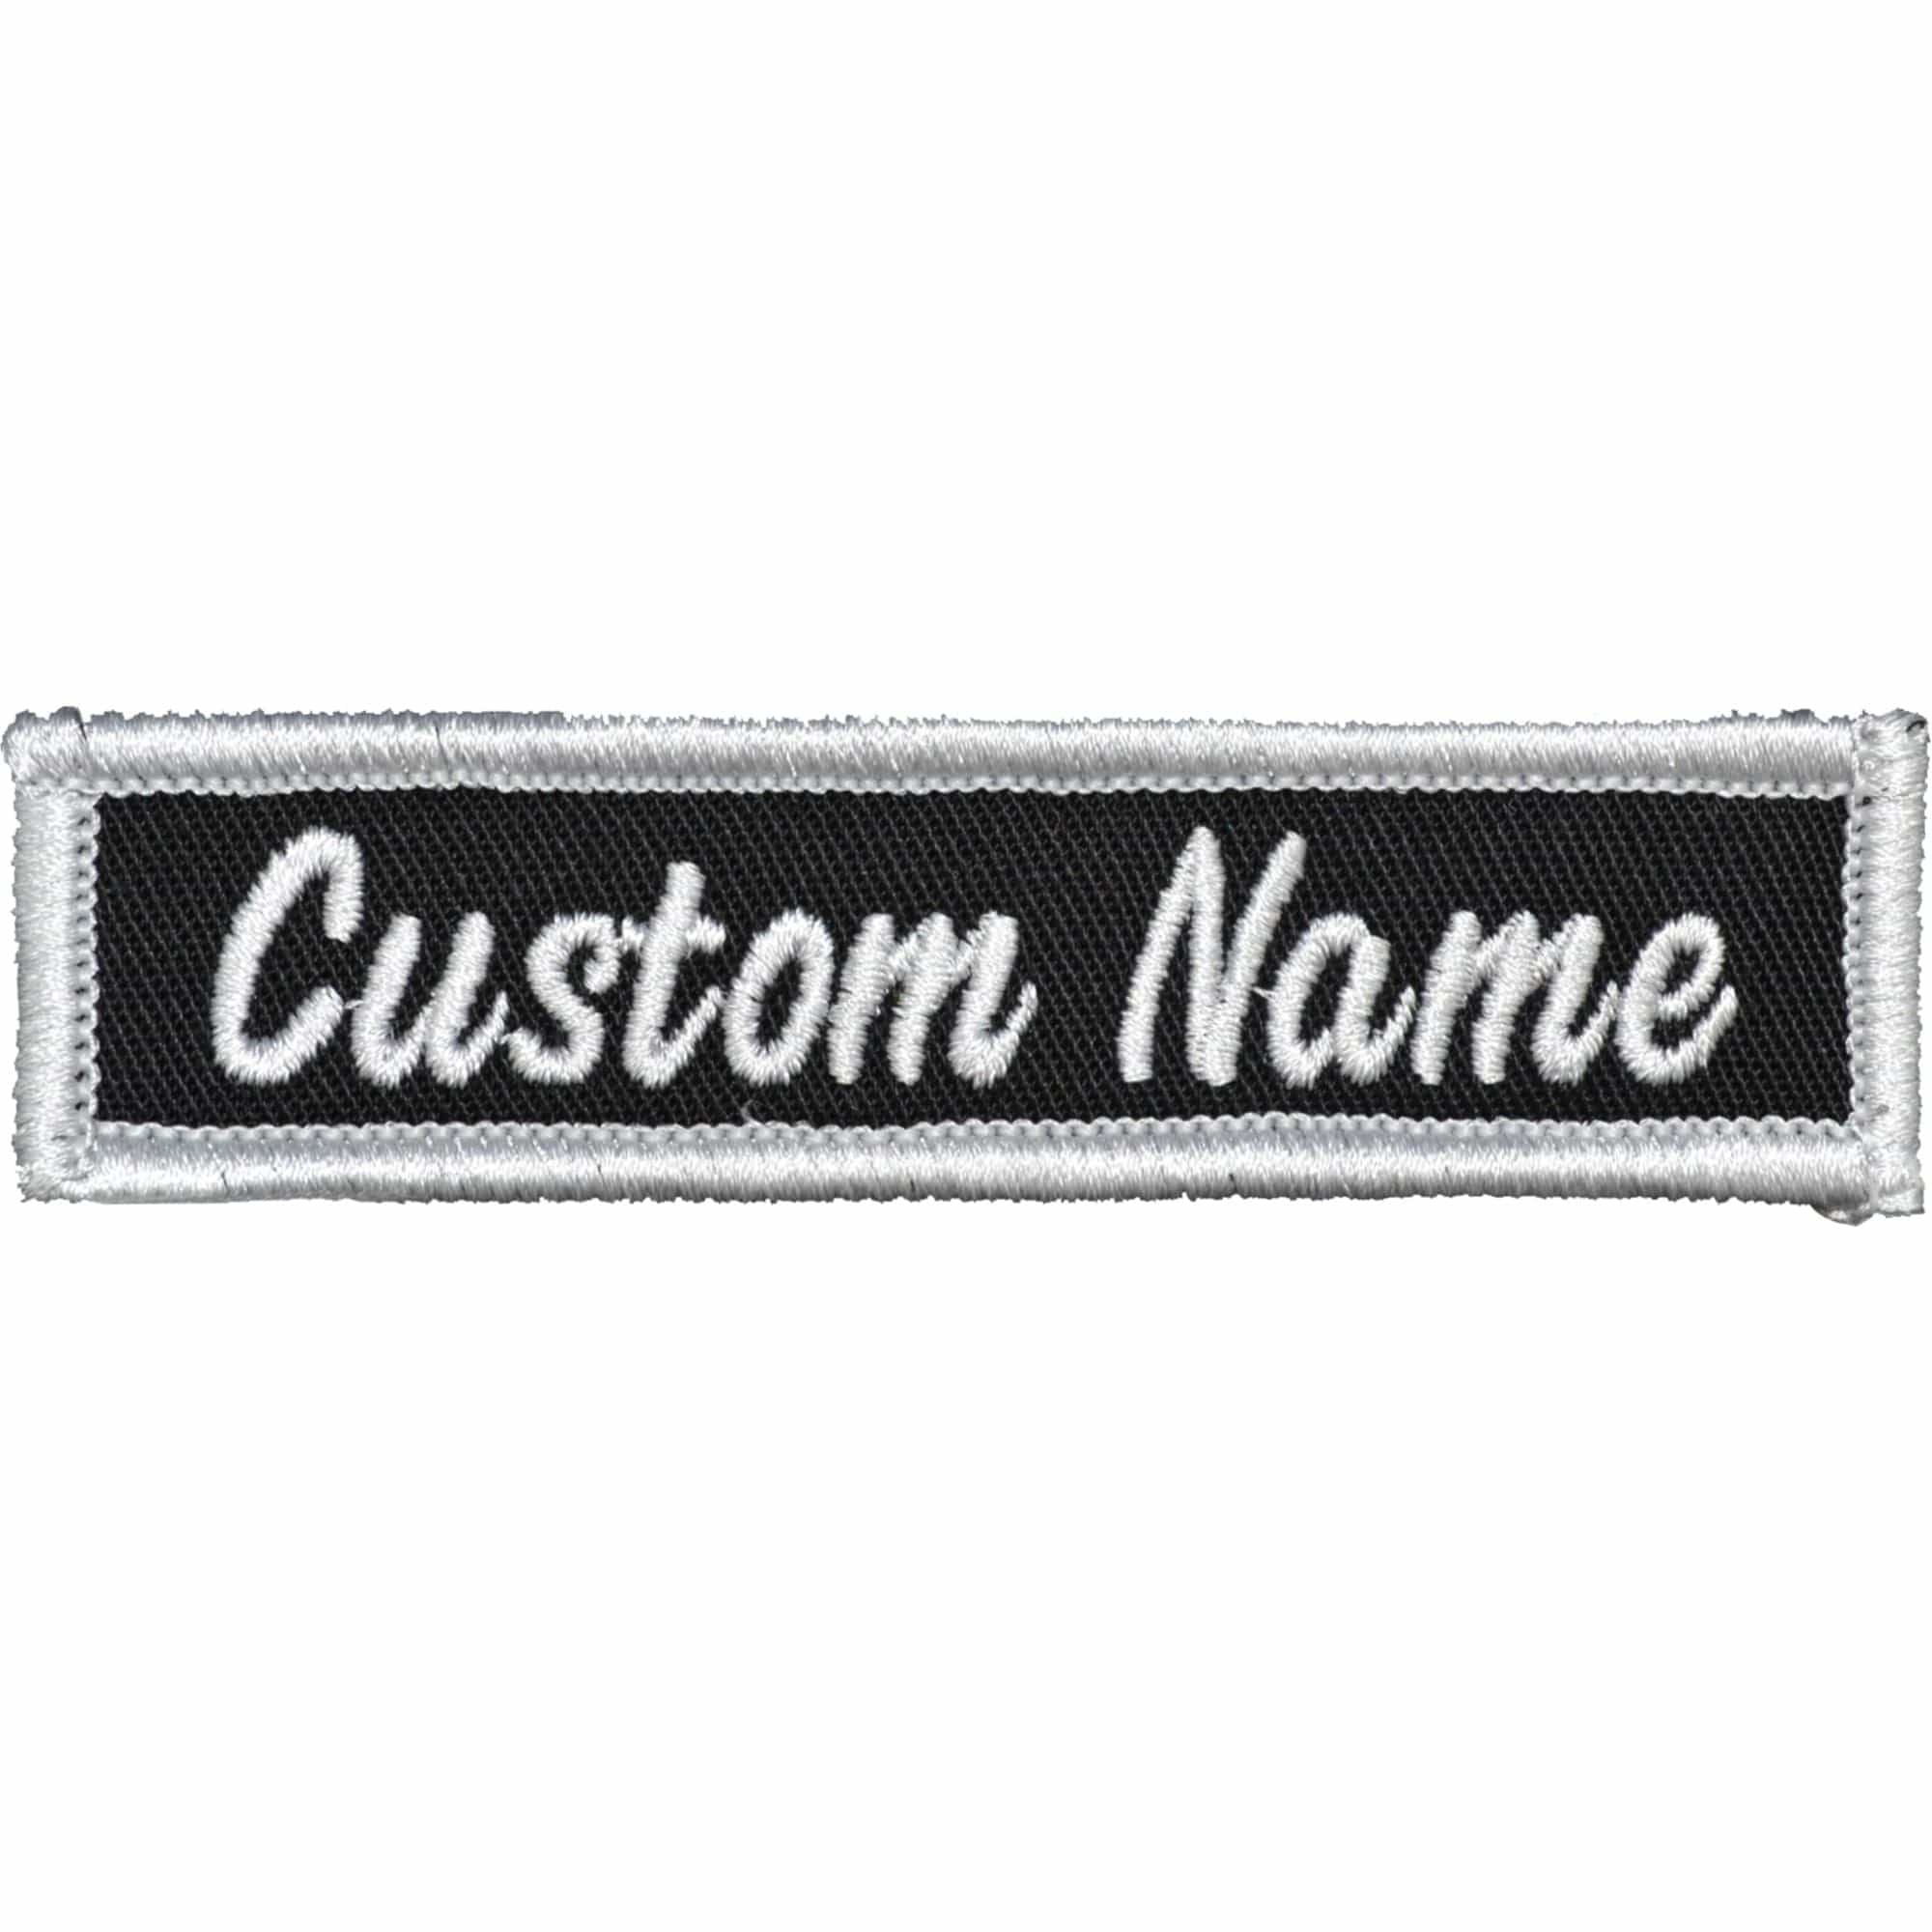 Custom Name Tag Embroidered Sew or Iron on Patch Black and White tag